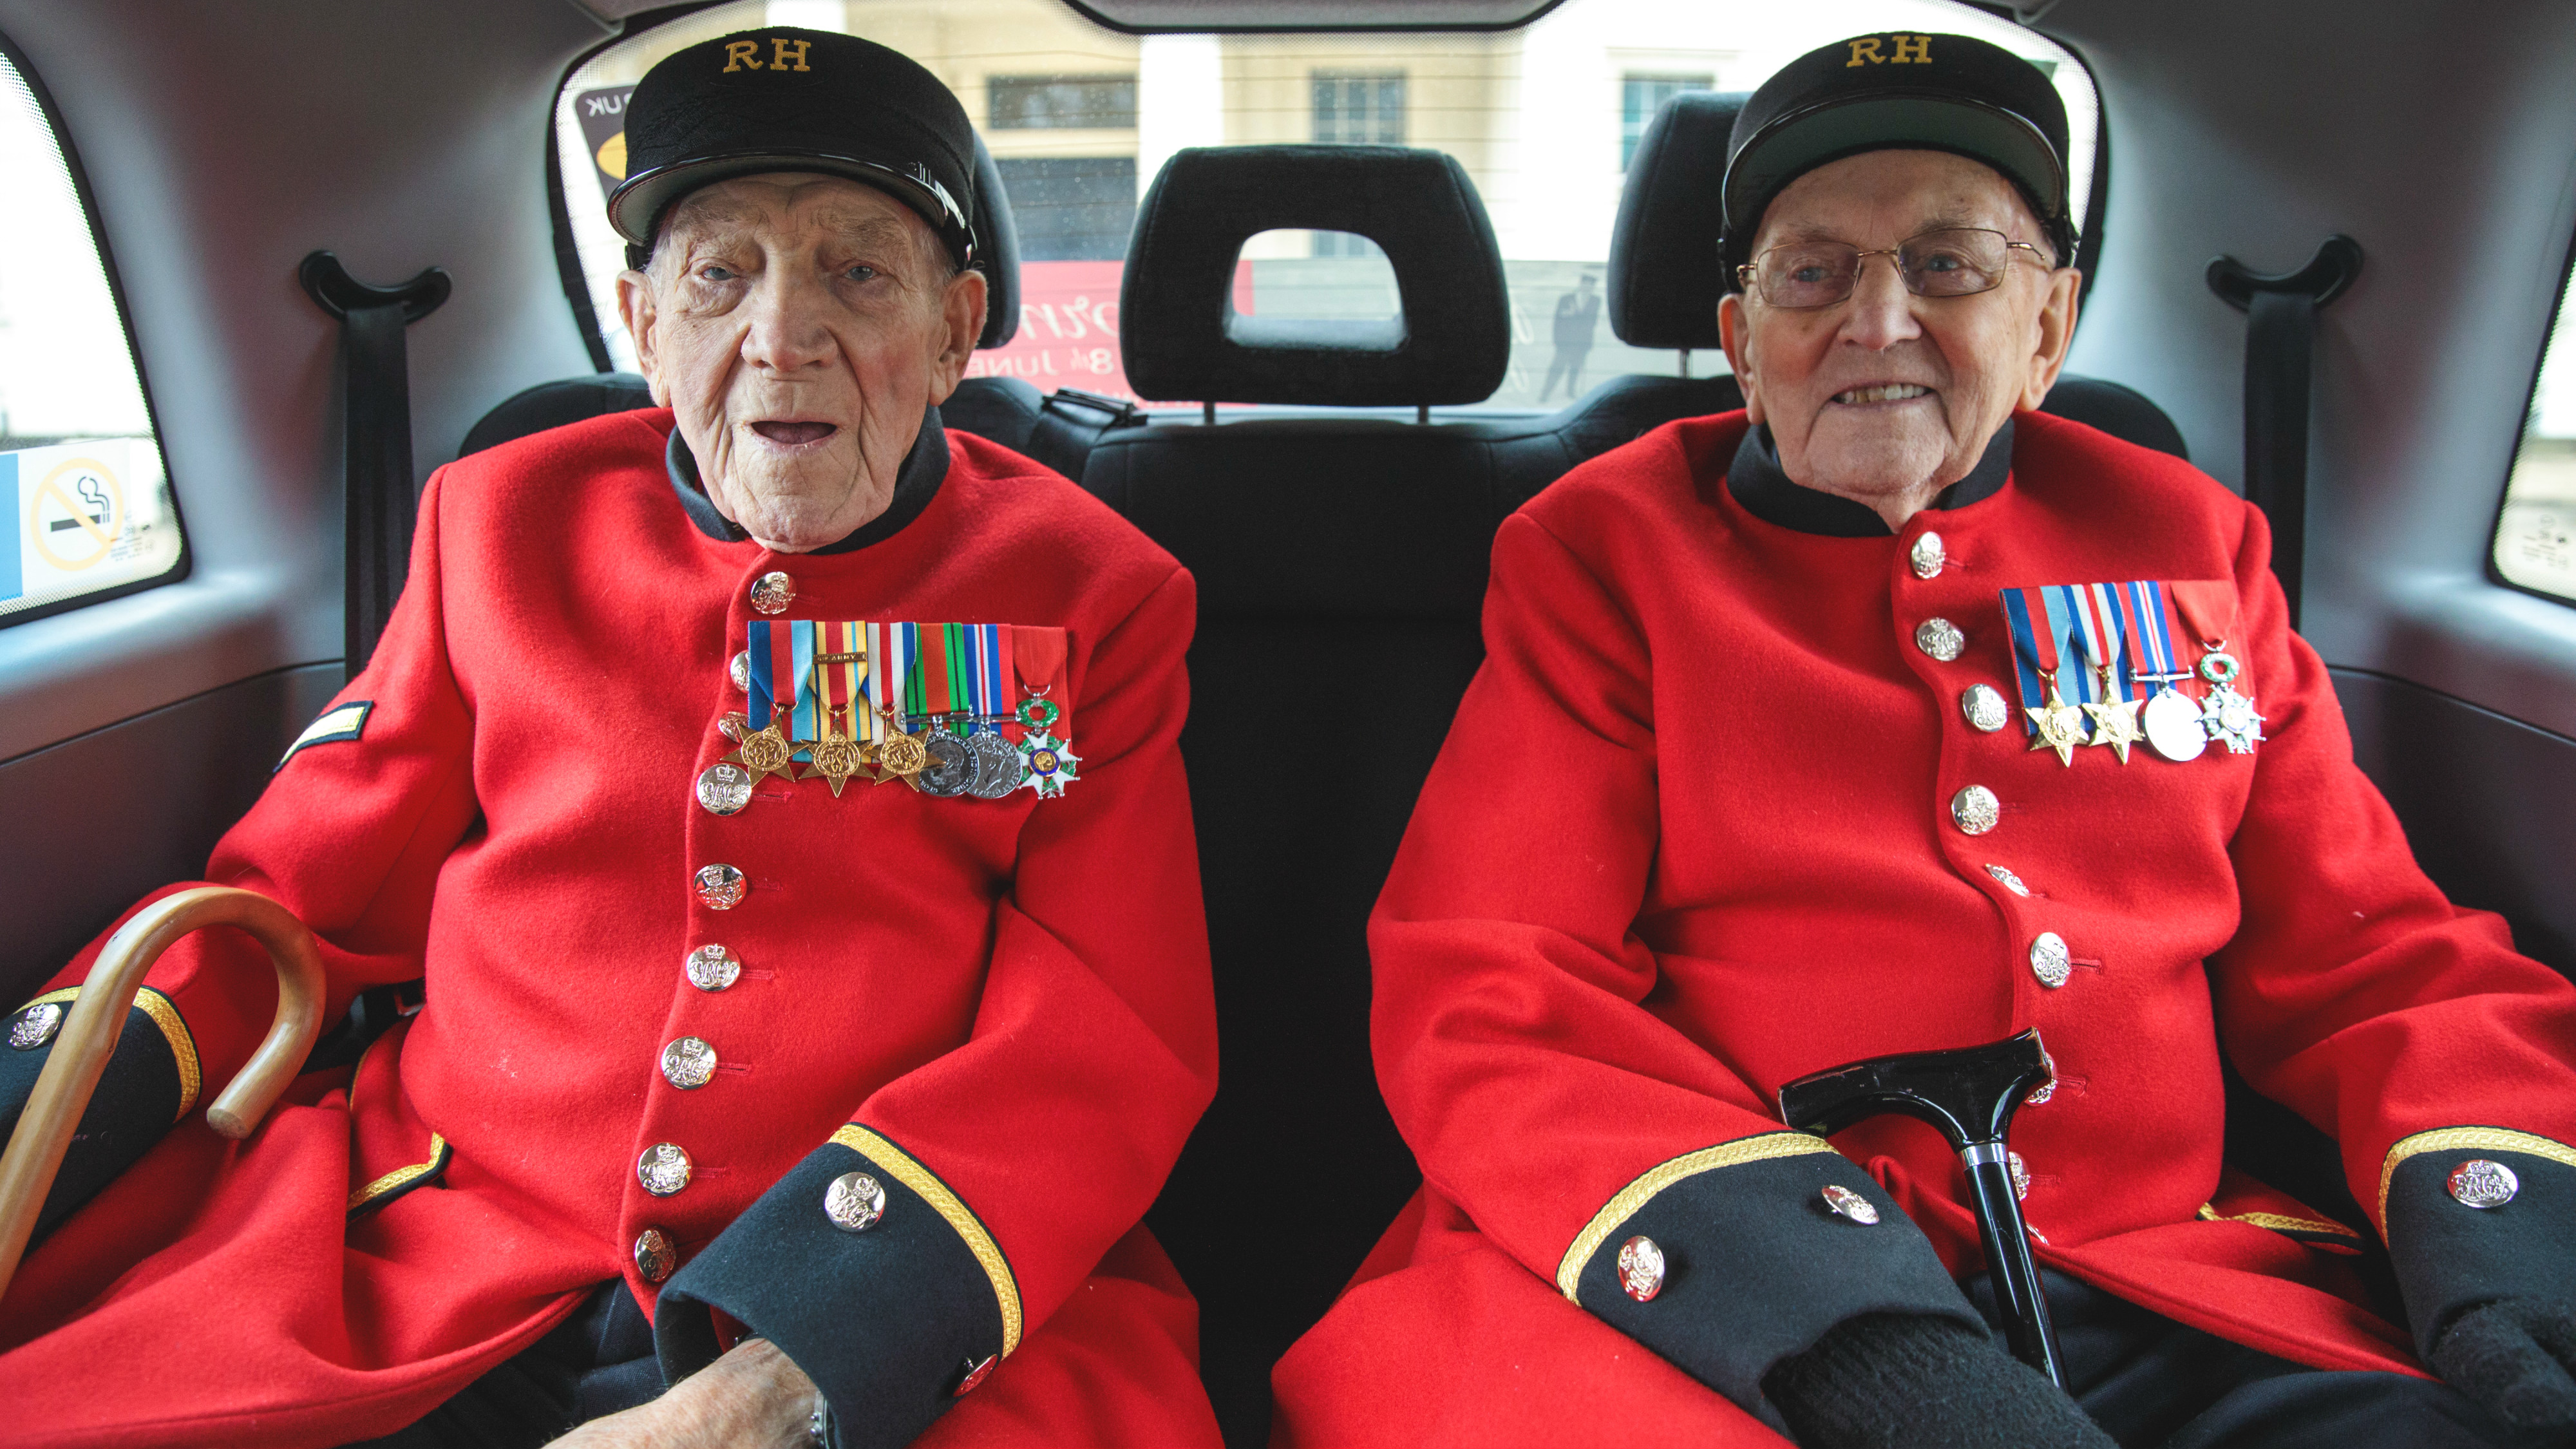 George Skipper and Bill Fitzgerald launch the Veterans Black Cab charity, which offers free rides to old soldiers